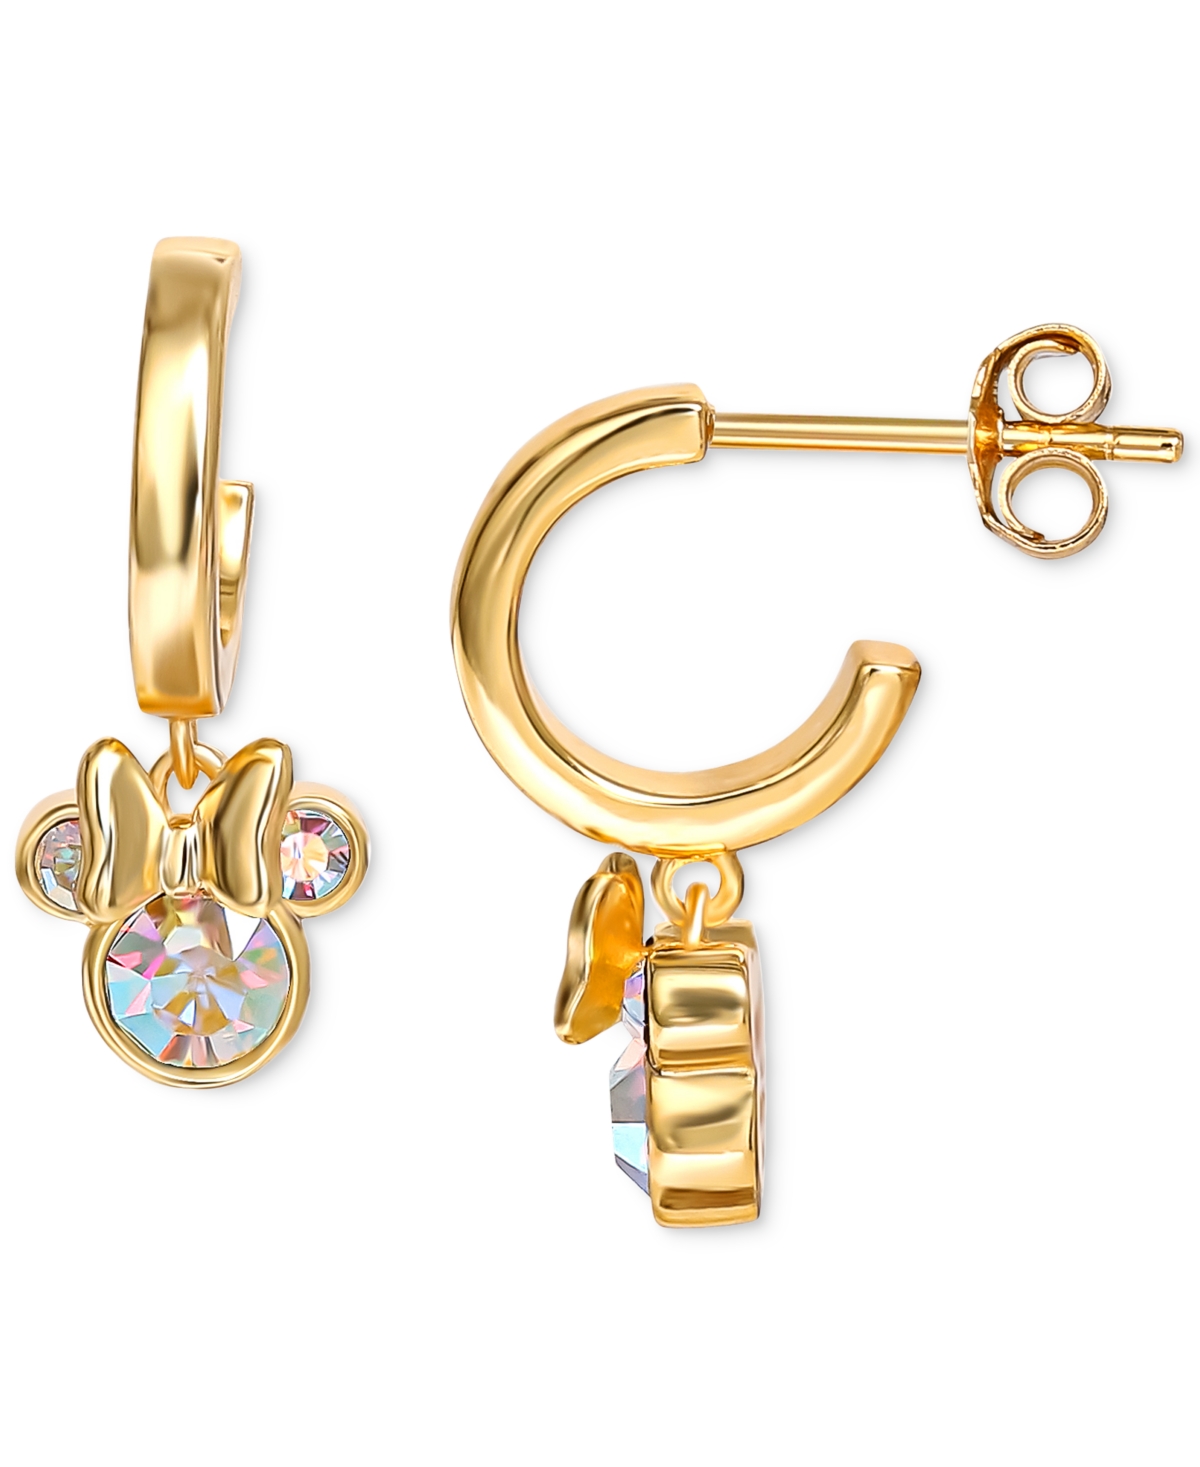 Disney Crystal Minnie Mouse Dangle Hoop Earrings In 18k Gold-plated Sterling Silver In Gold Over Silver